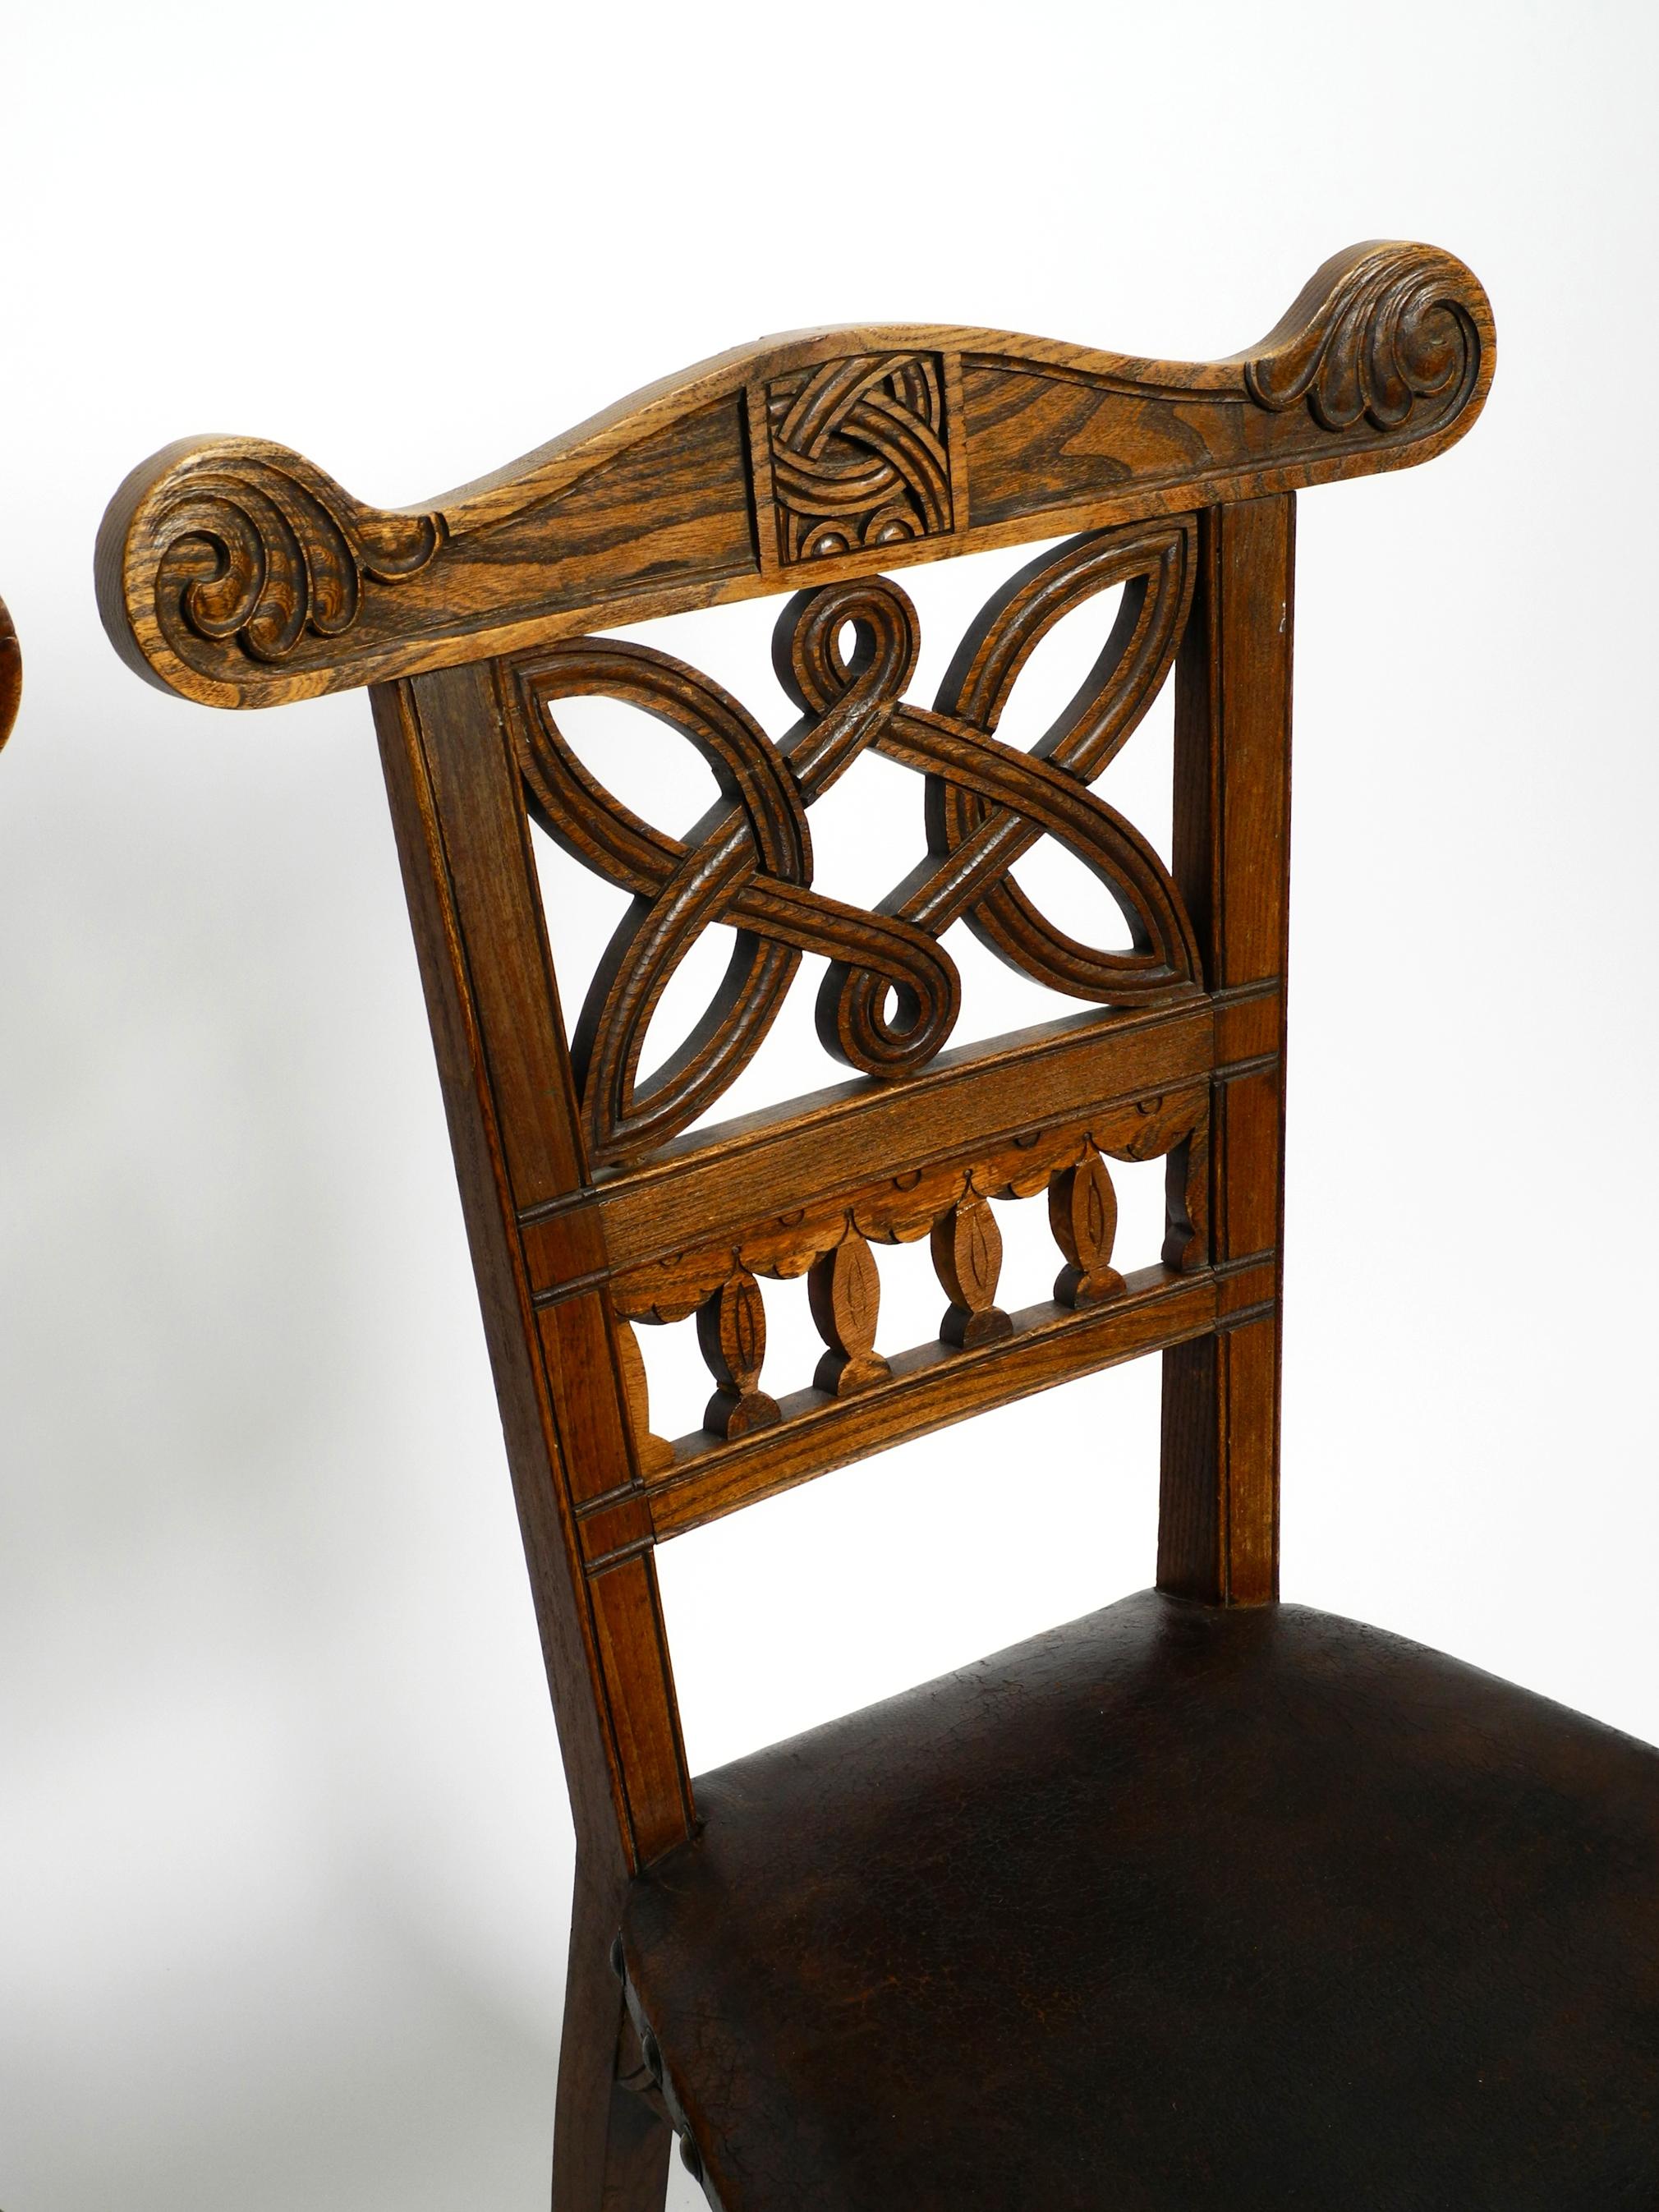 Early 20th Century 2 Art Nouveau Oak Chairs Still with the Original Leather Seats from Around 1900 For Sale